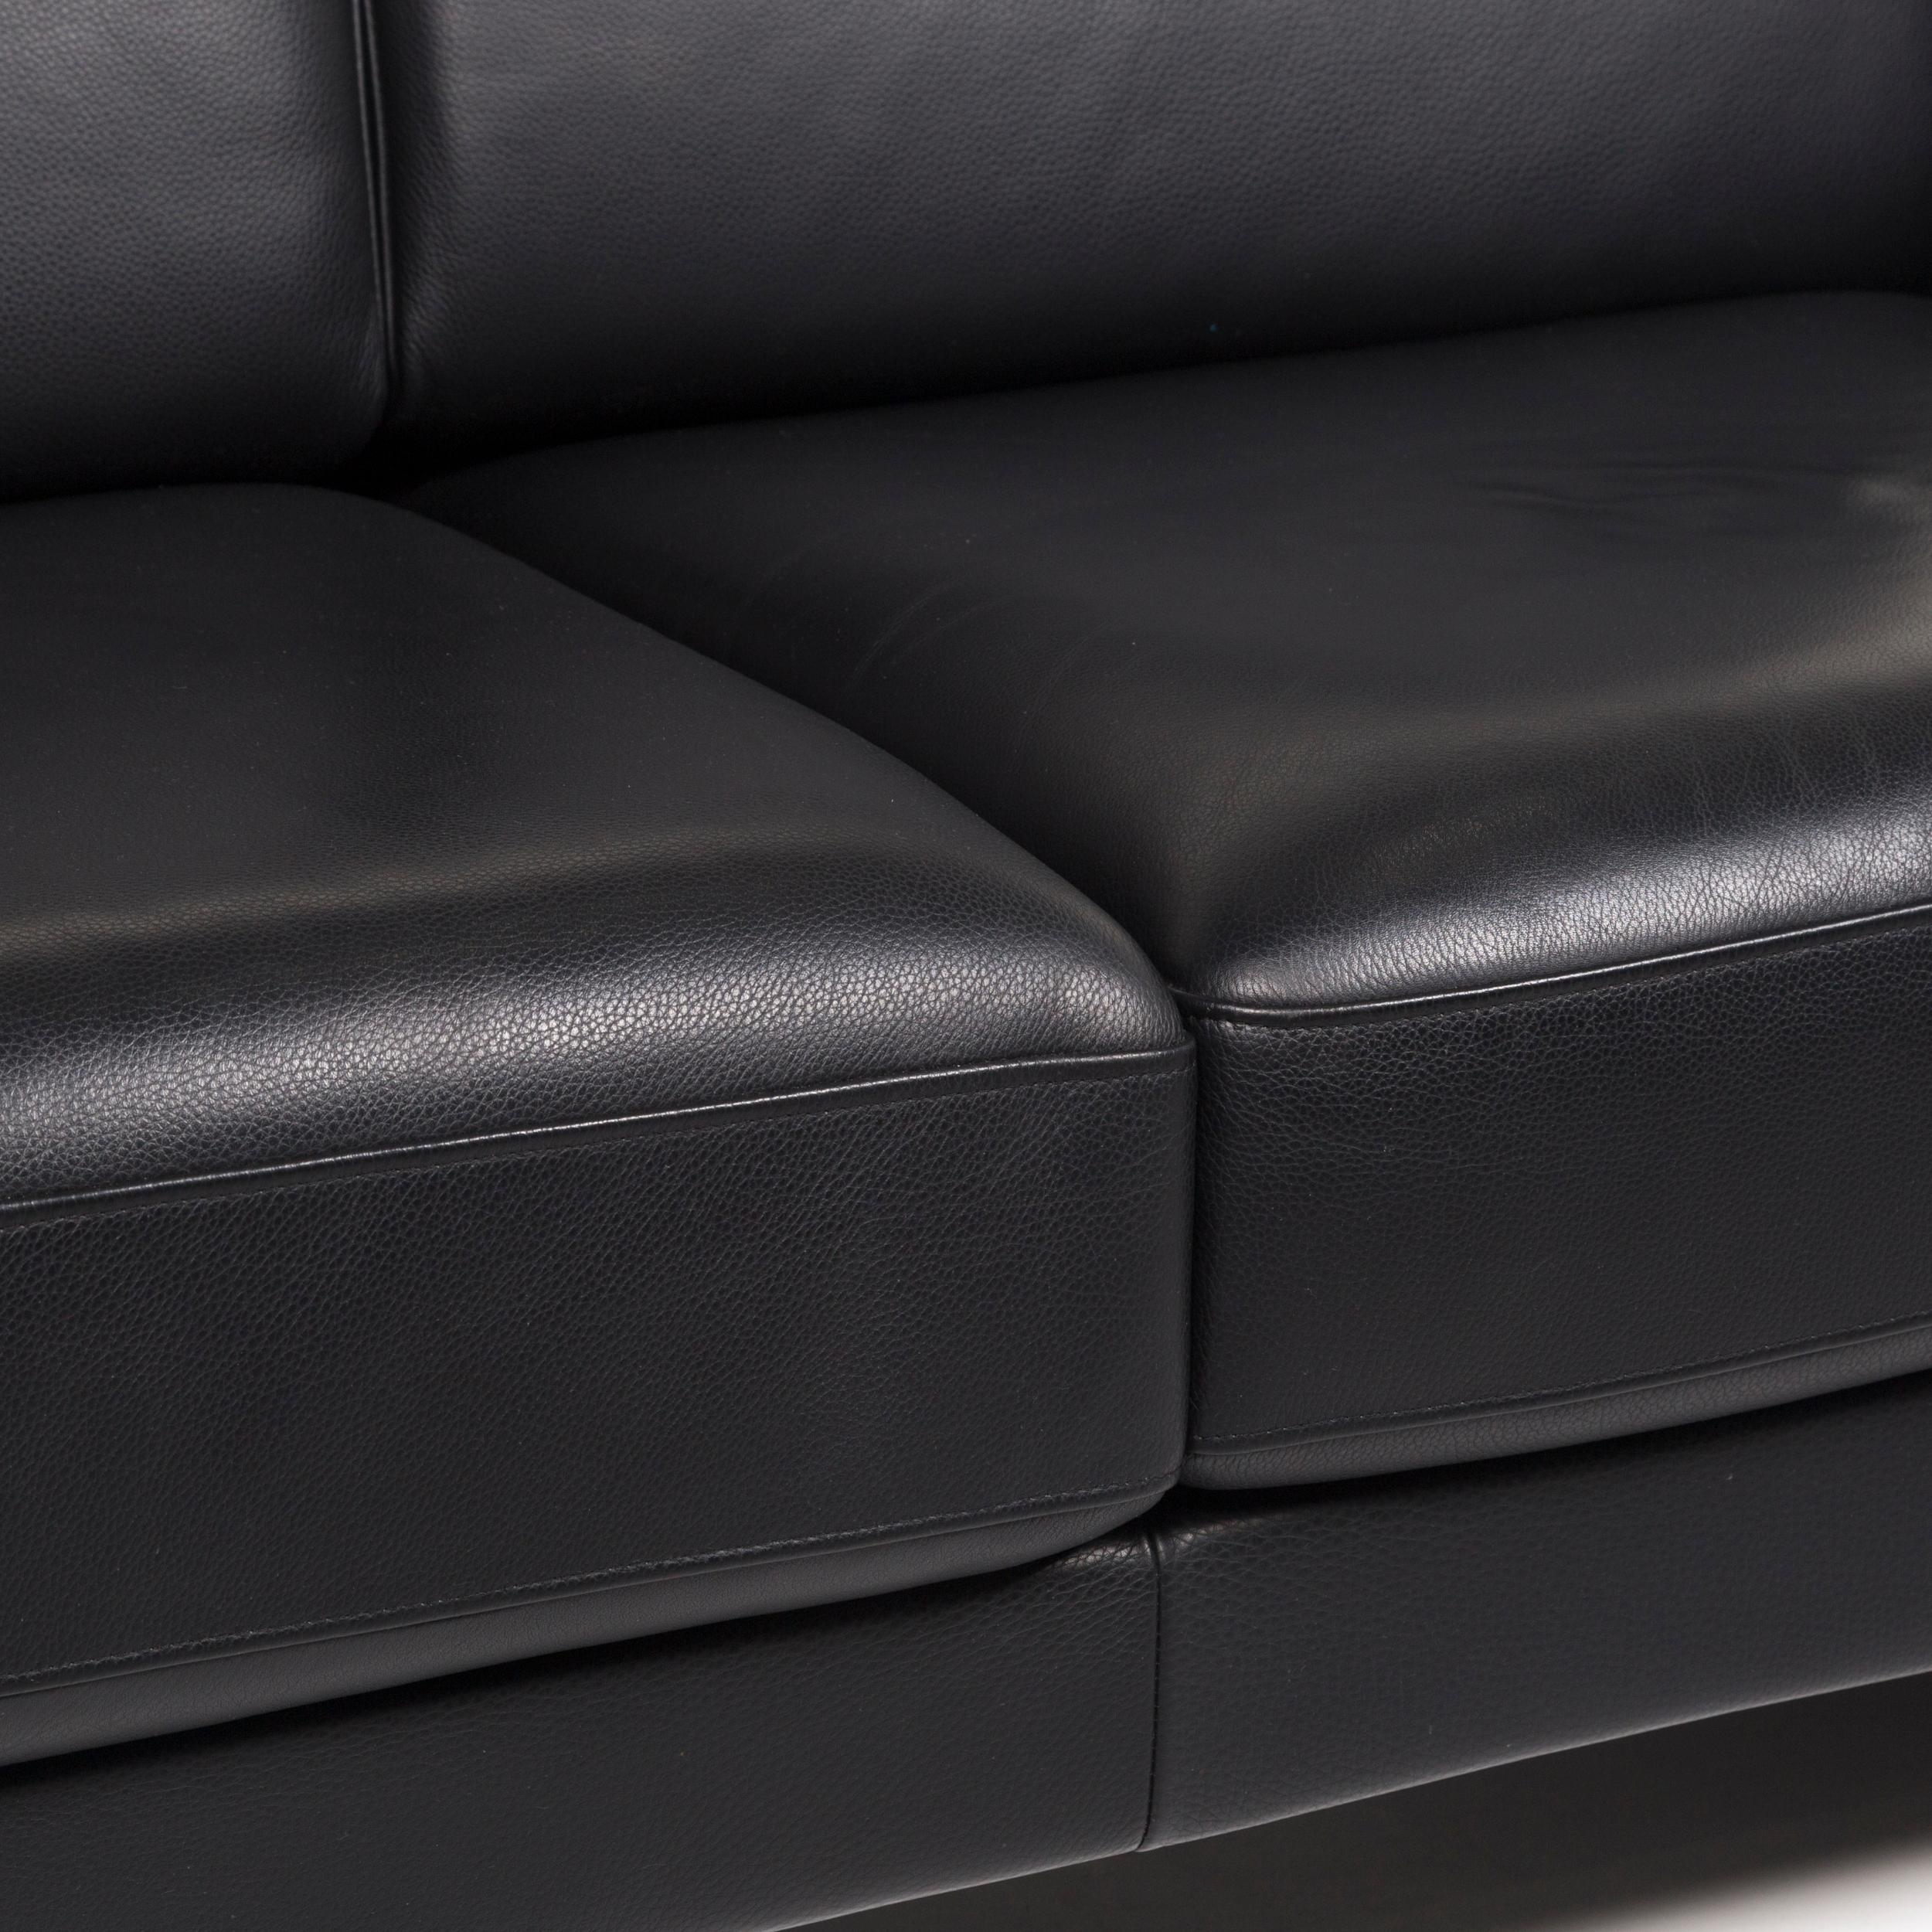 We bring to you a Rolf Benz Rolf Benz Ego leather sofa Garnitu black 2 two-seat.

 

 Product measurements in centimeters:
 

Depth 95
Width 146
Height 85
Seat-height 45
Rest-height 50
Seat-depth 56
Seat-width 125
Back-height 43.